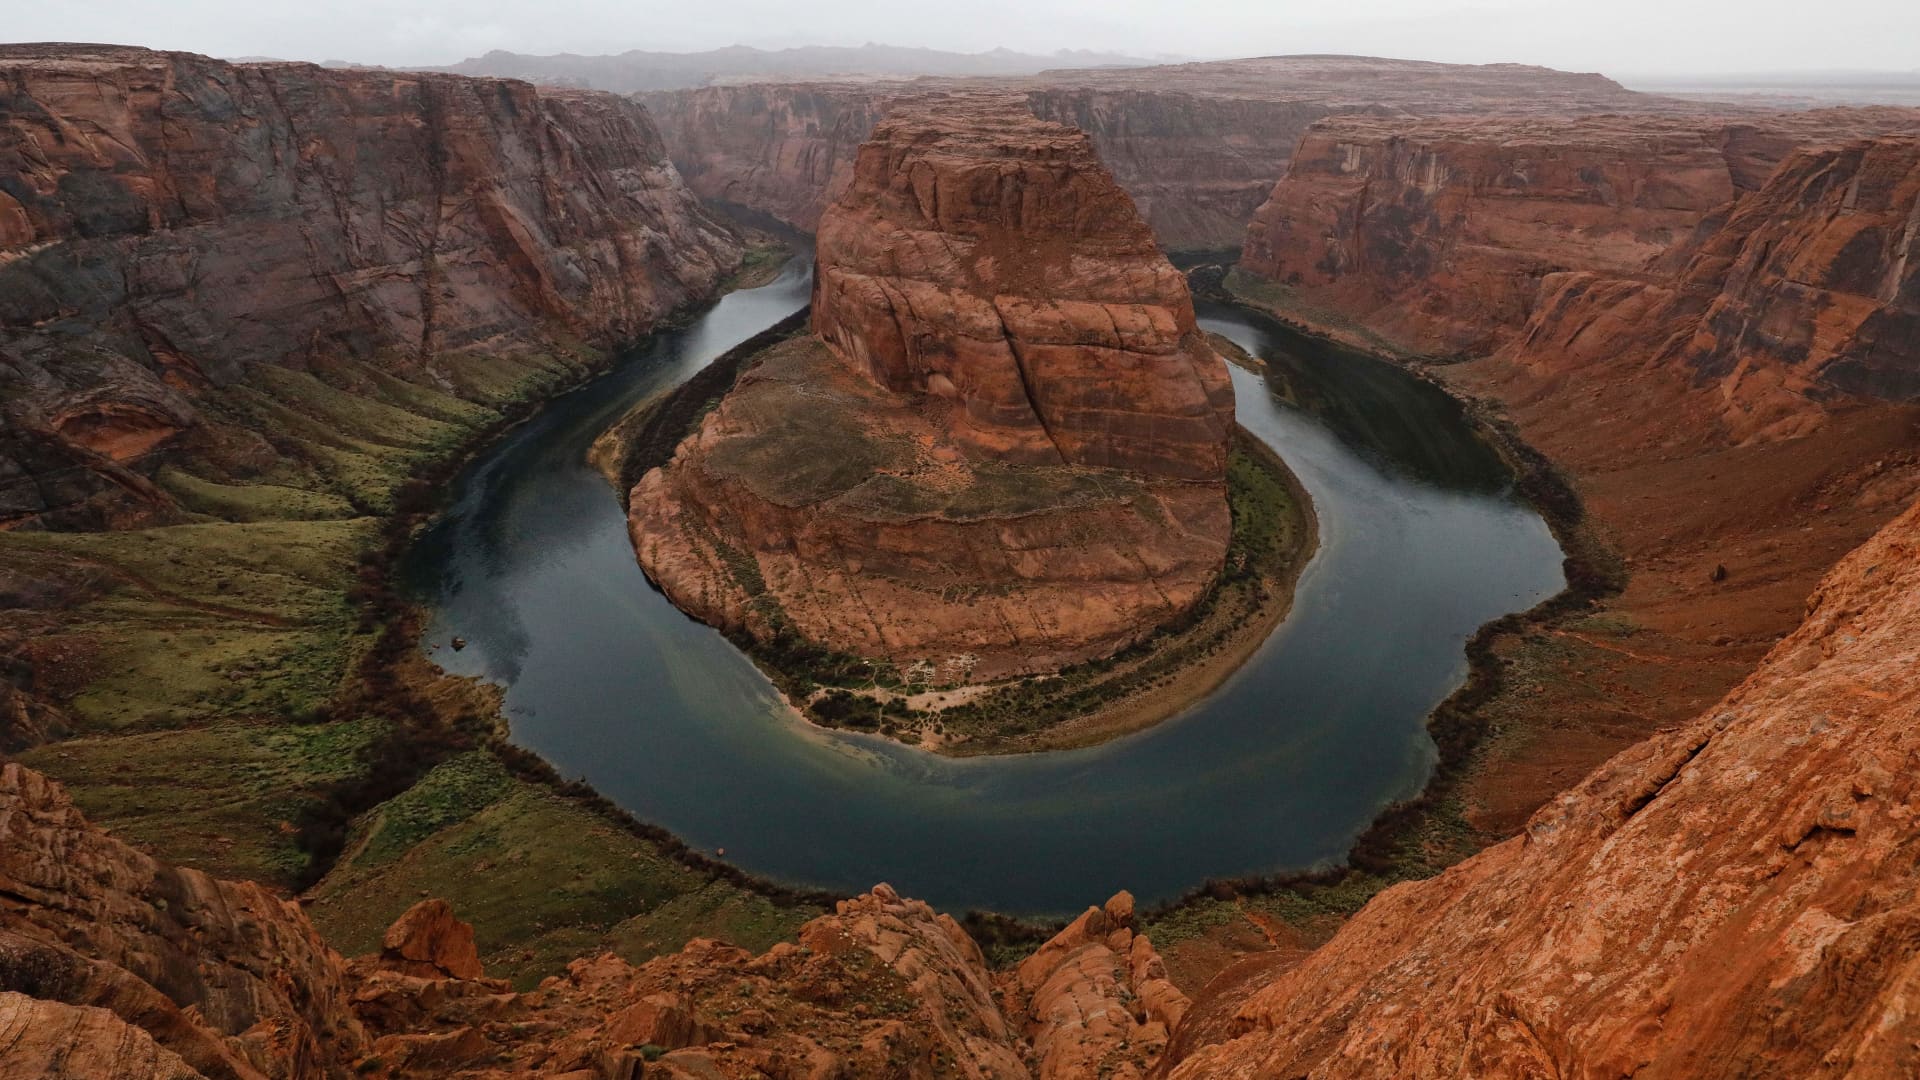 The Colorado River wraps around Horseshoe Bend in the in Glen Canyon National Recreation Area in Page, Arizona.